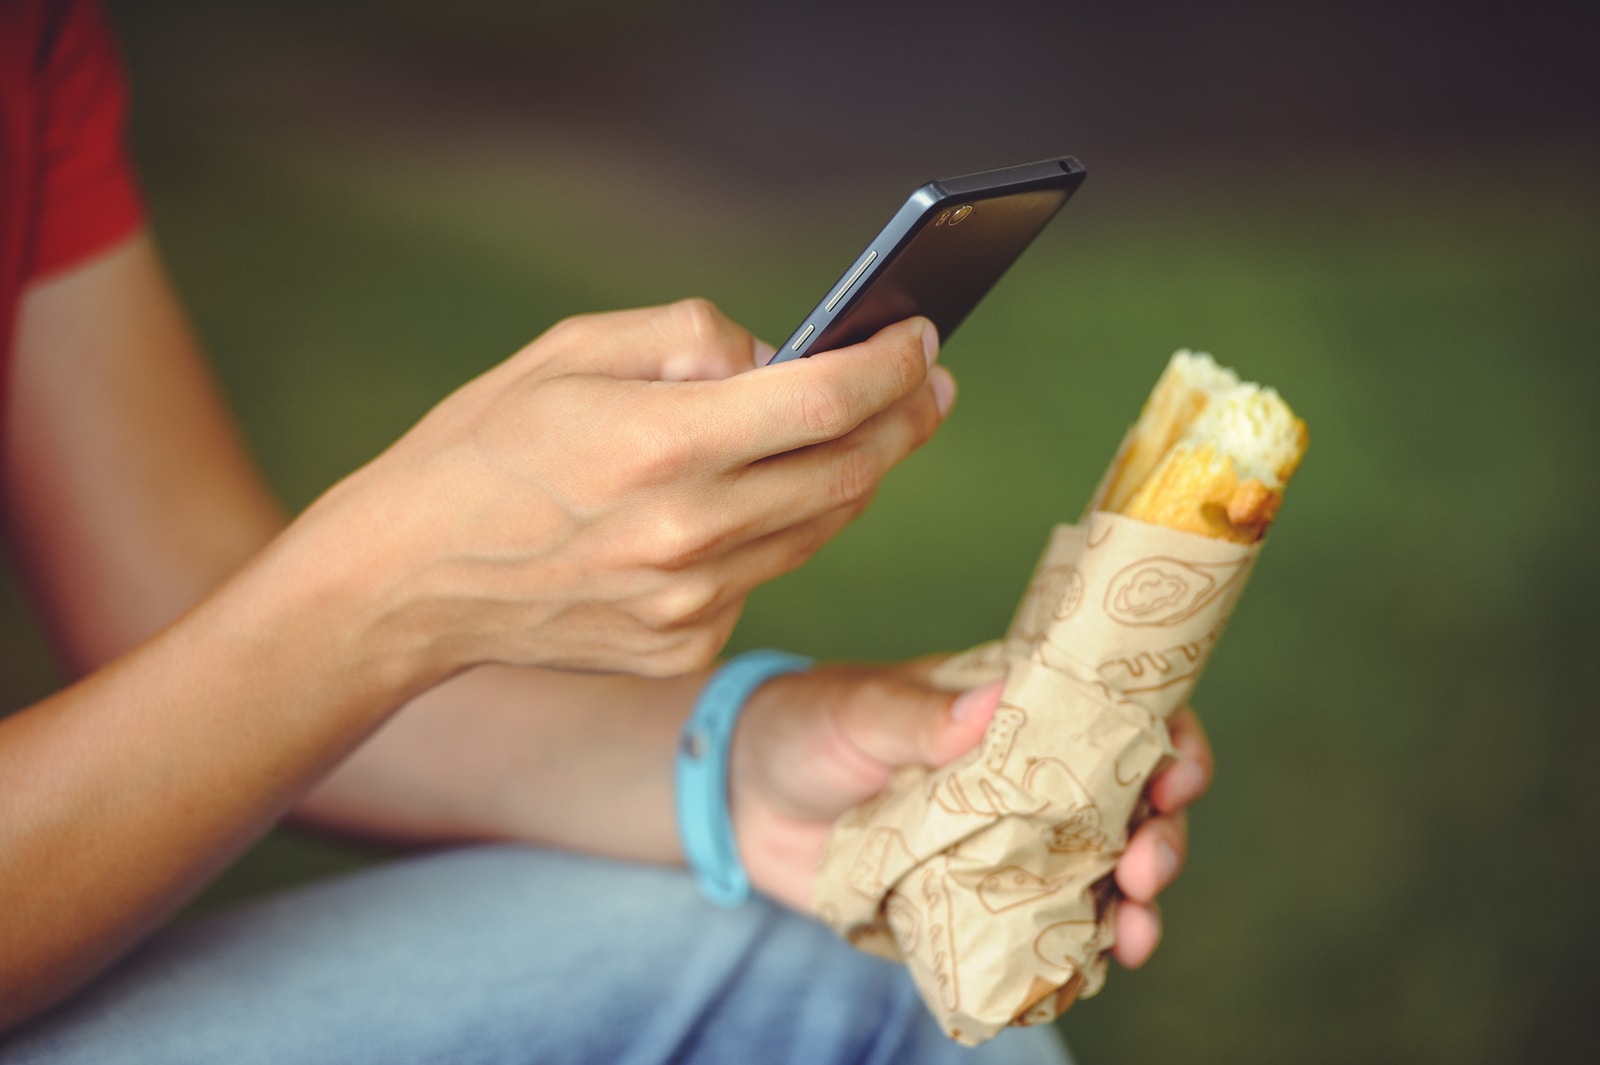 Free smartphone coupon apps for fast food connoisseurs